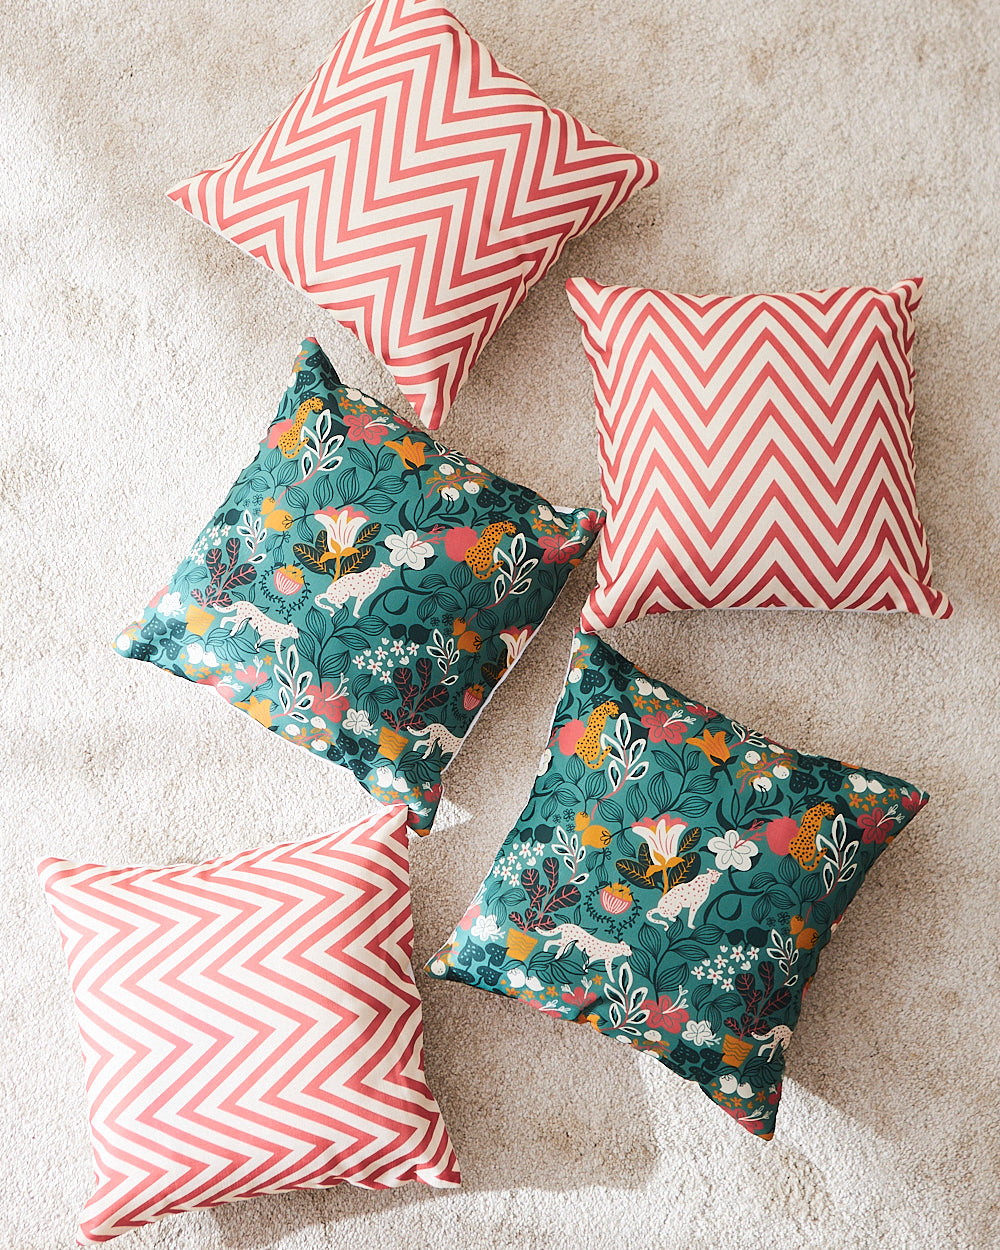 Teal by Chumbak 16" Cushion Covers , Set of 5 Multi color| Zip closure